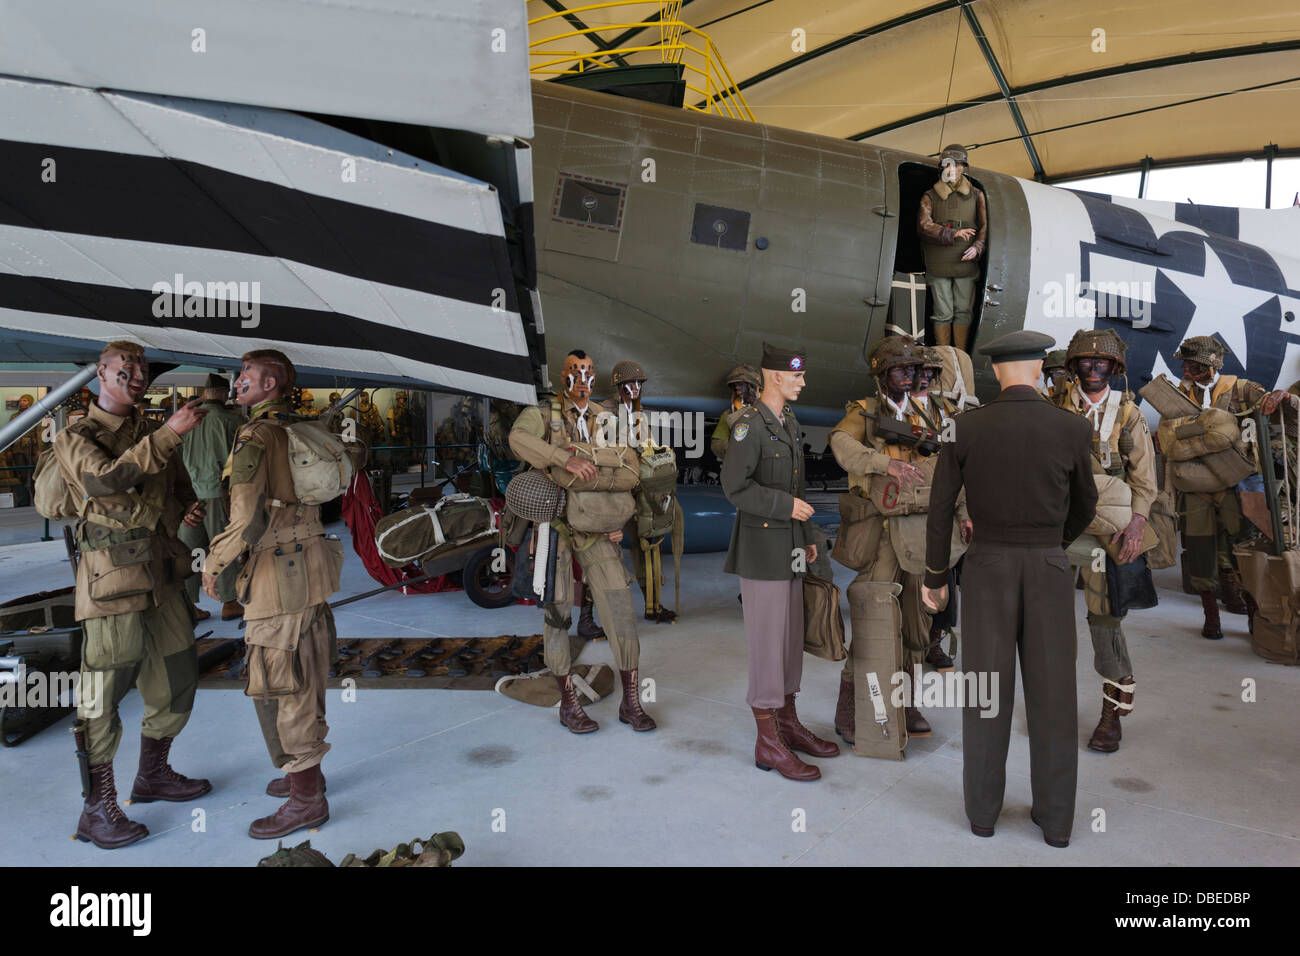 France, Normandy, Sainte Mere Eglise, Airborne Museum. Diorama of C-47 Dakota transport and US paratroopers with Eisenhower. Stock Photo